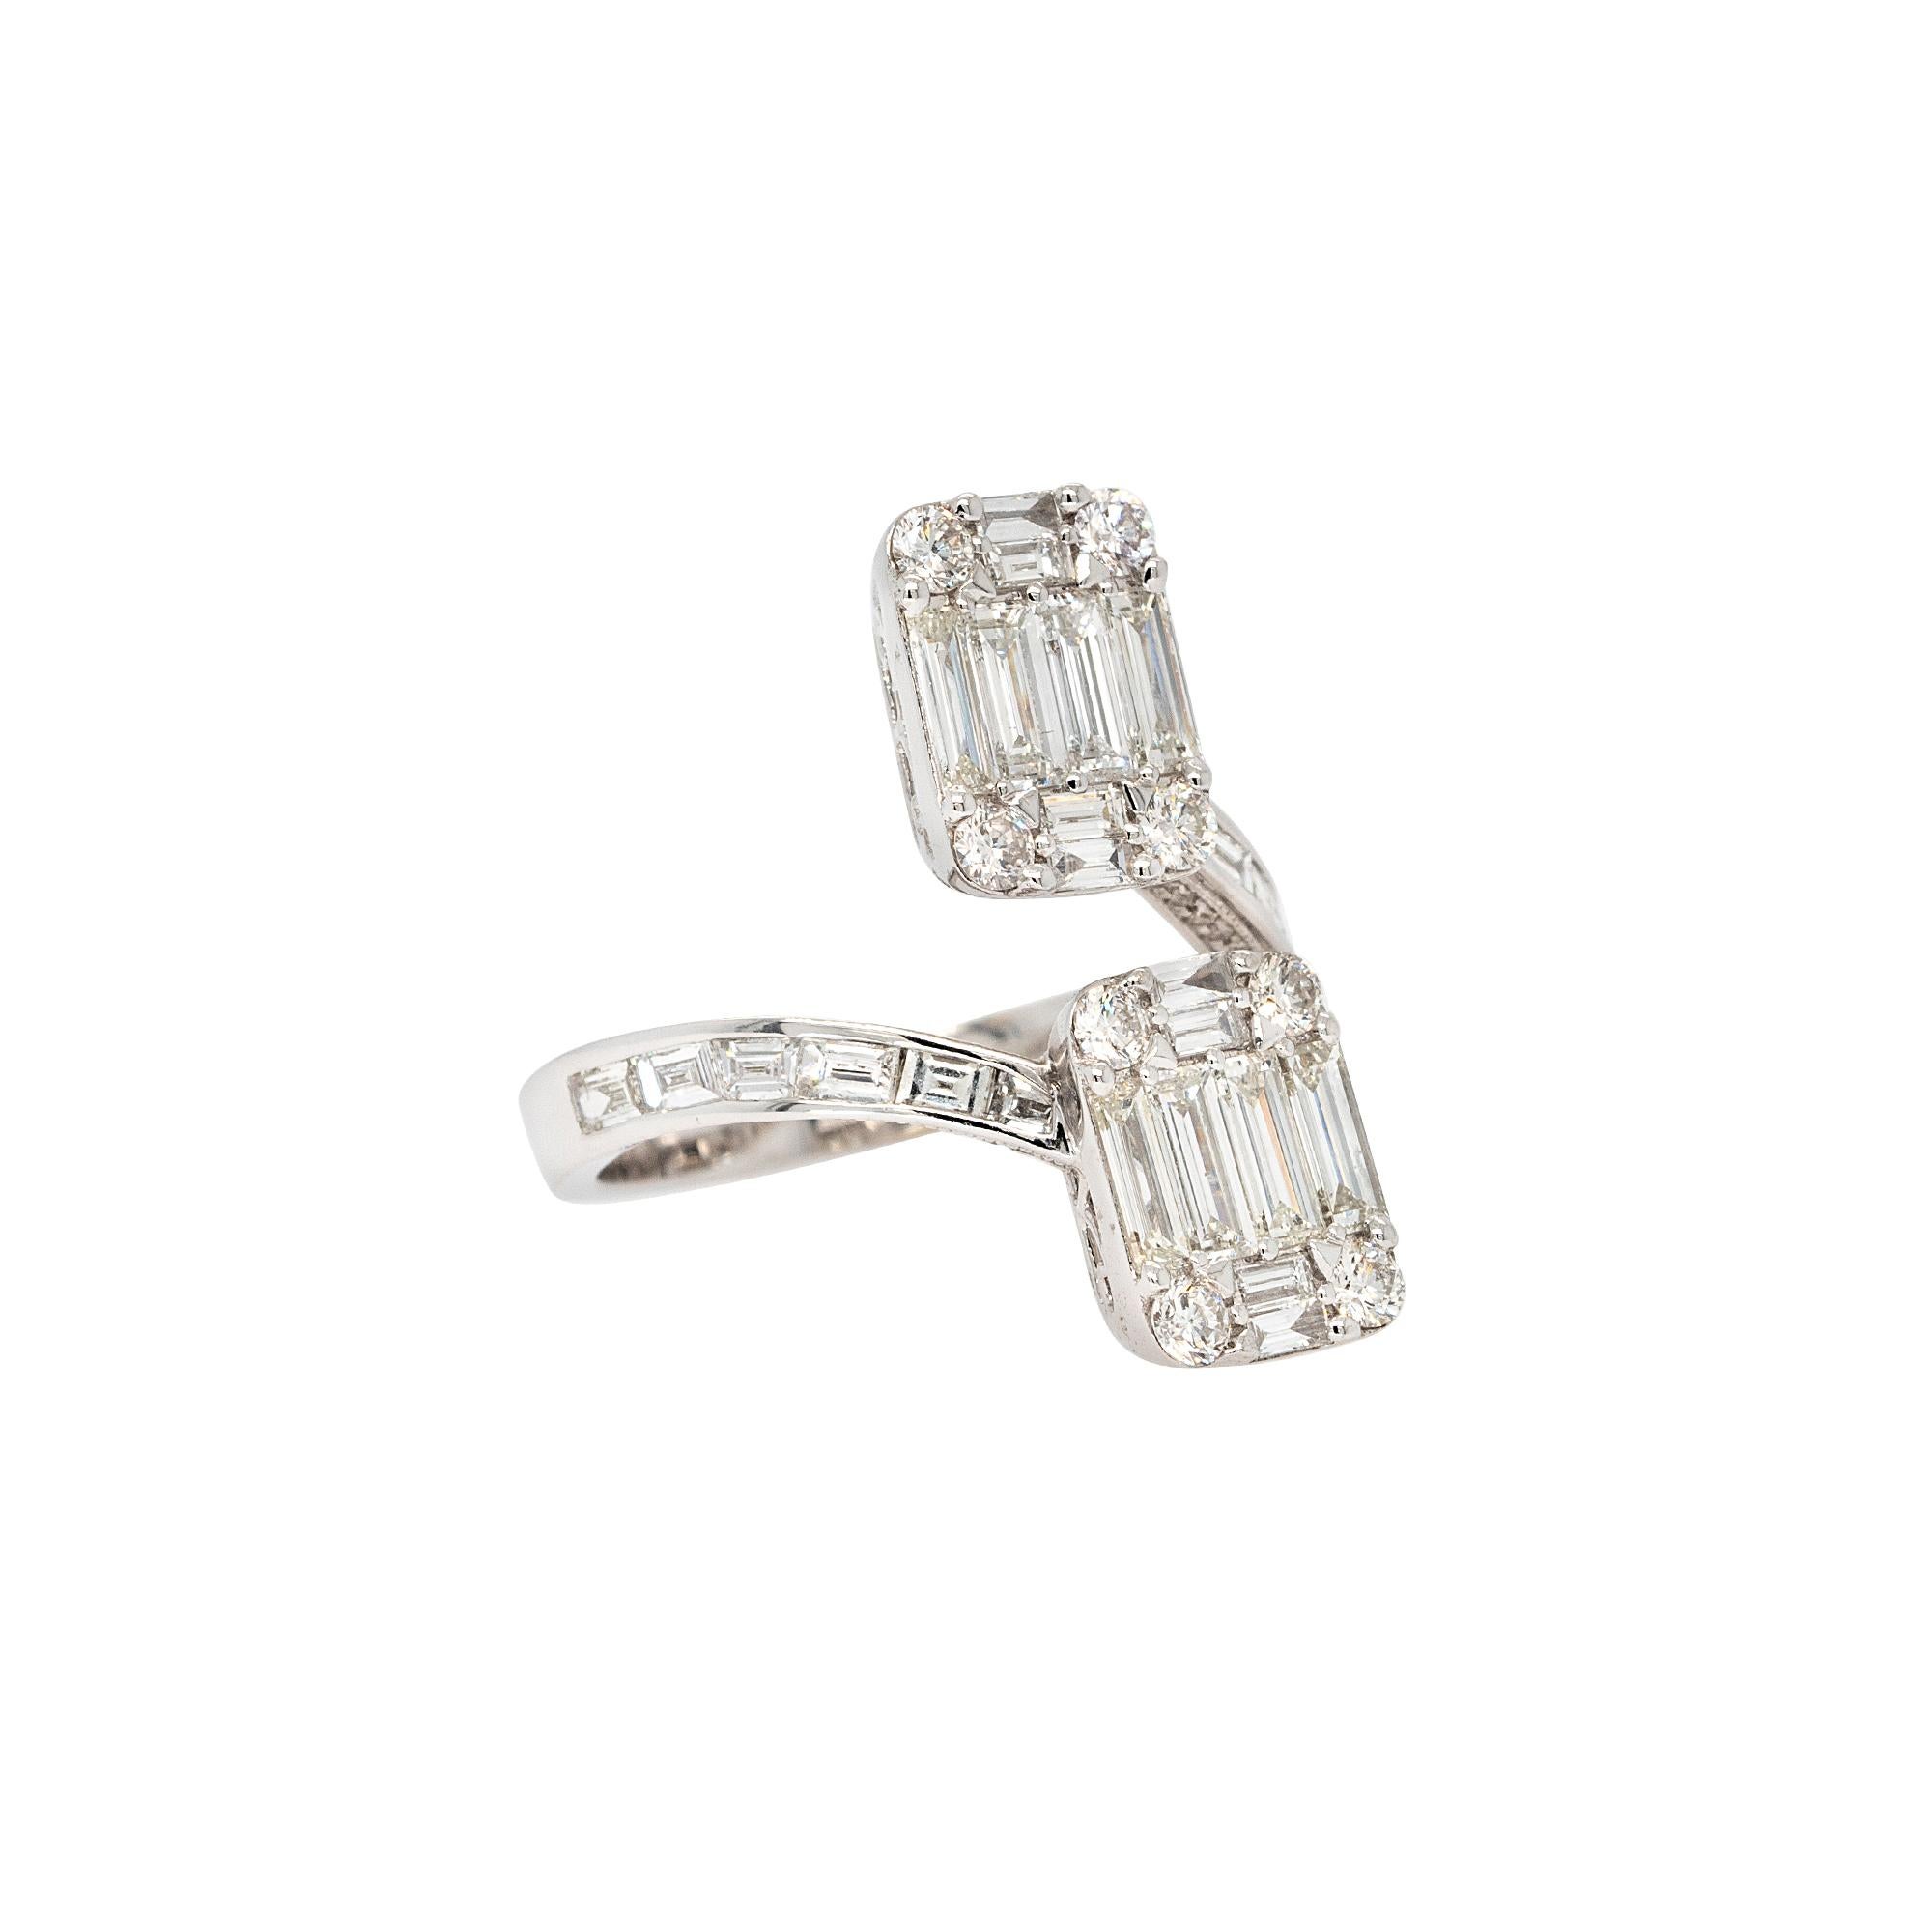 Diamond Details:
1.69ct Baguette Cut Natural Diamond
0.51ct Round Brilliant Natural Diamond
G Color VS Clarity
Ring Material: 18k White Gold
Ring Size: 6.5 (can be sized)
Measurements: 10.6mm x 7.9mm
Total Weight: 5.6g (3.6dwt)
This item comes with